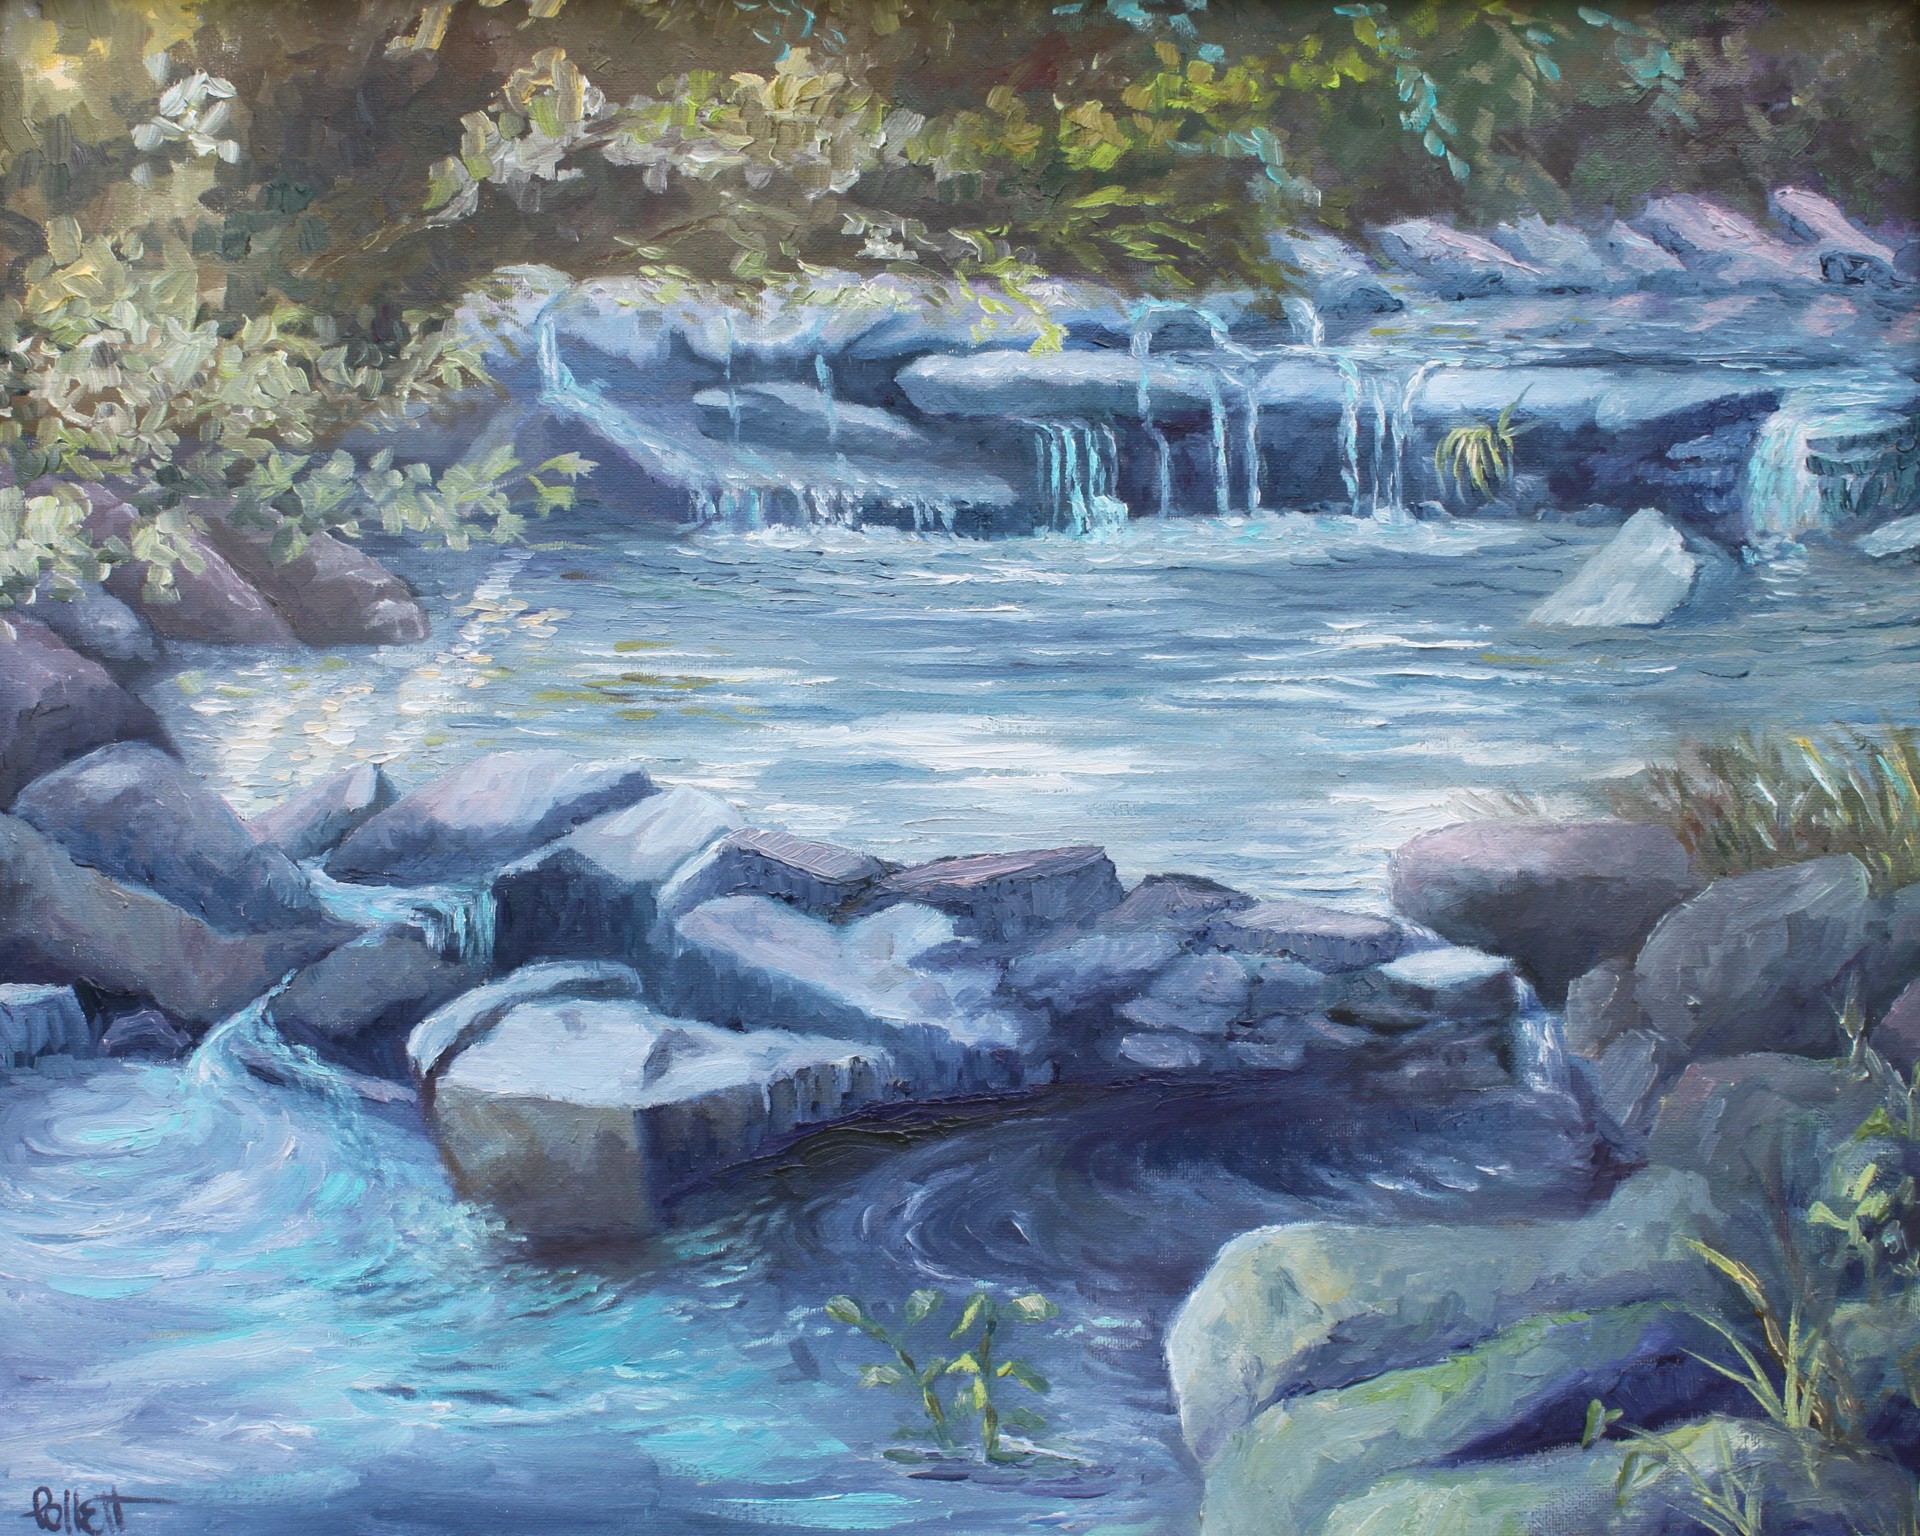 Trickle of a Tucked Away Stream by Cynthia Jewell Pollett